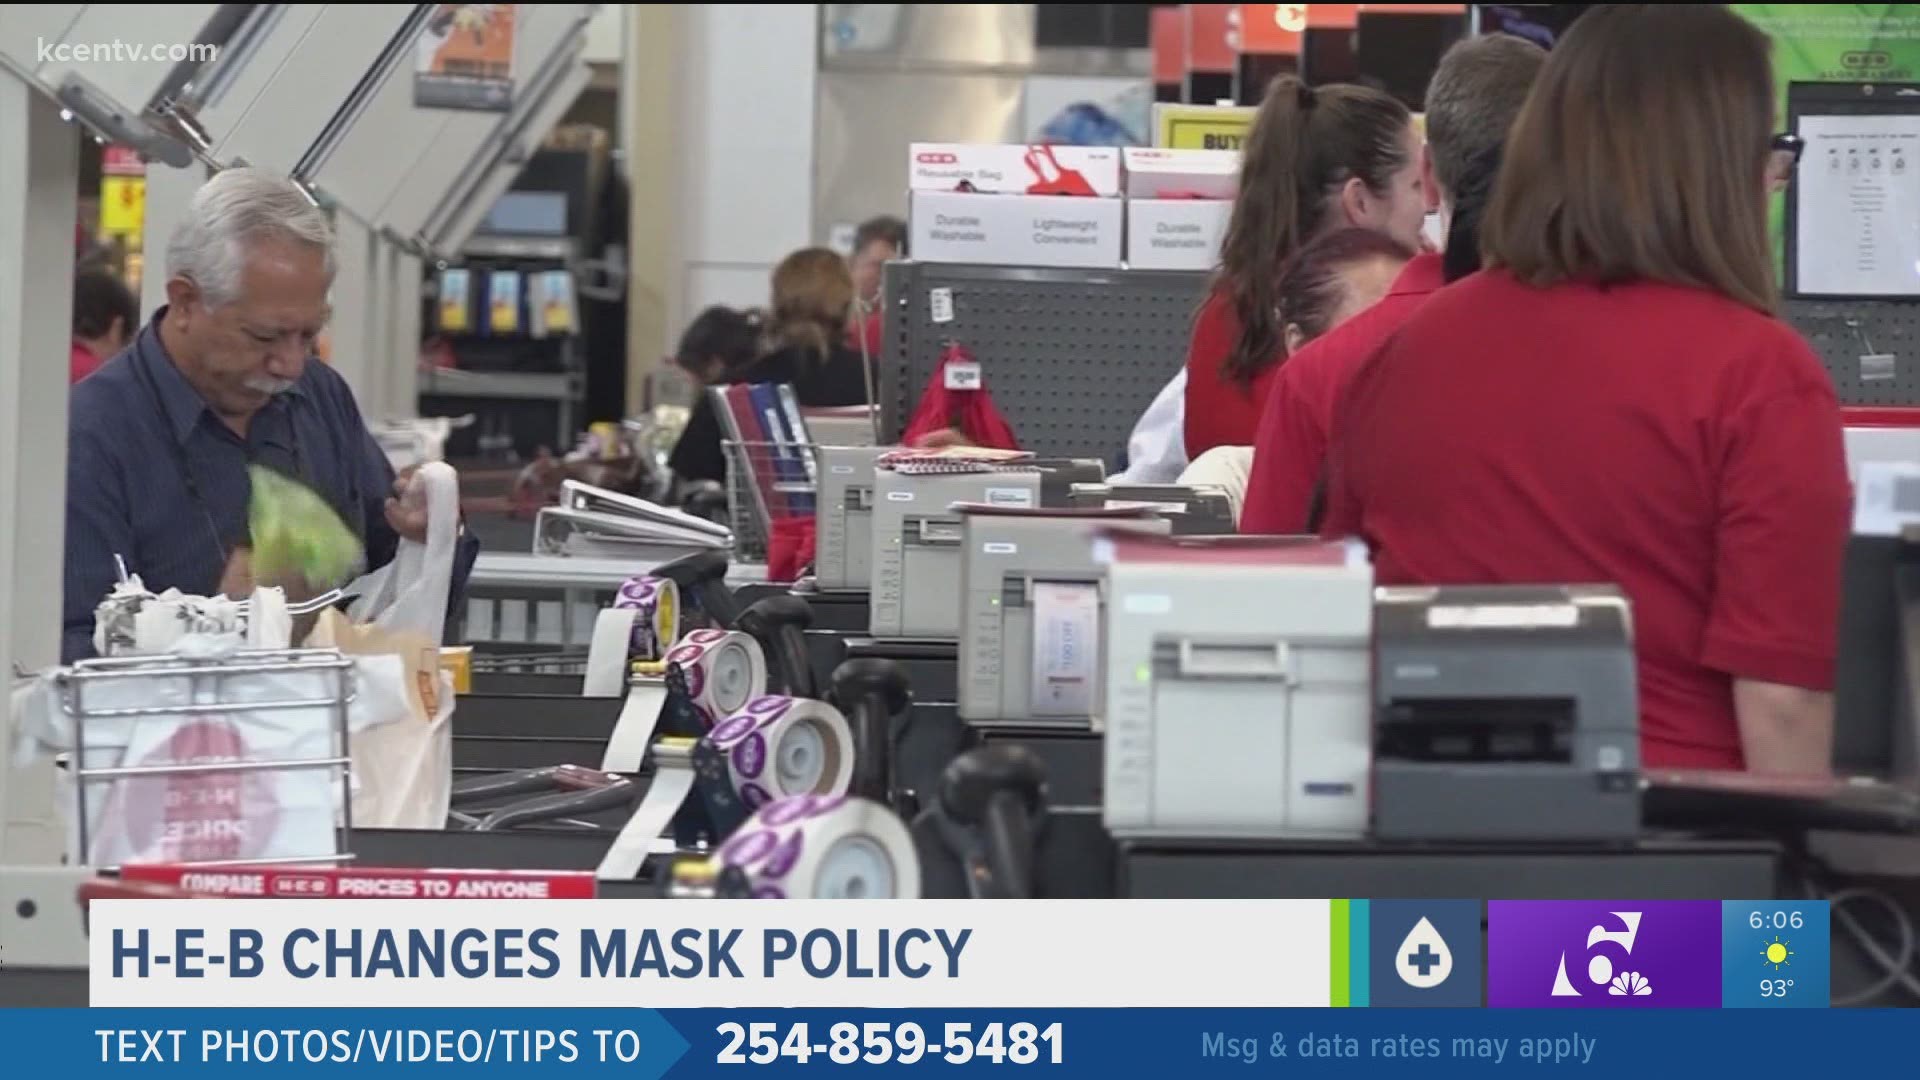 The company said it is making its decision based on the updated guidance from the CDC on mask use.